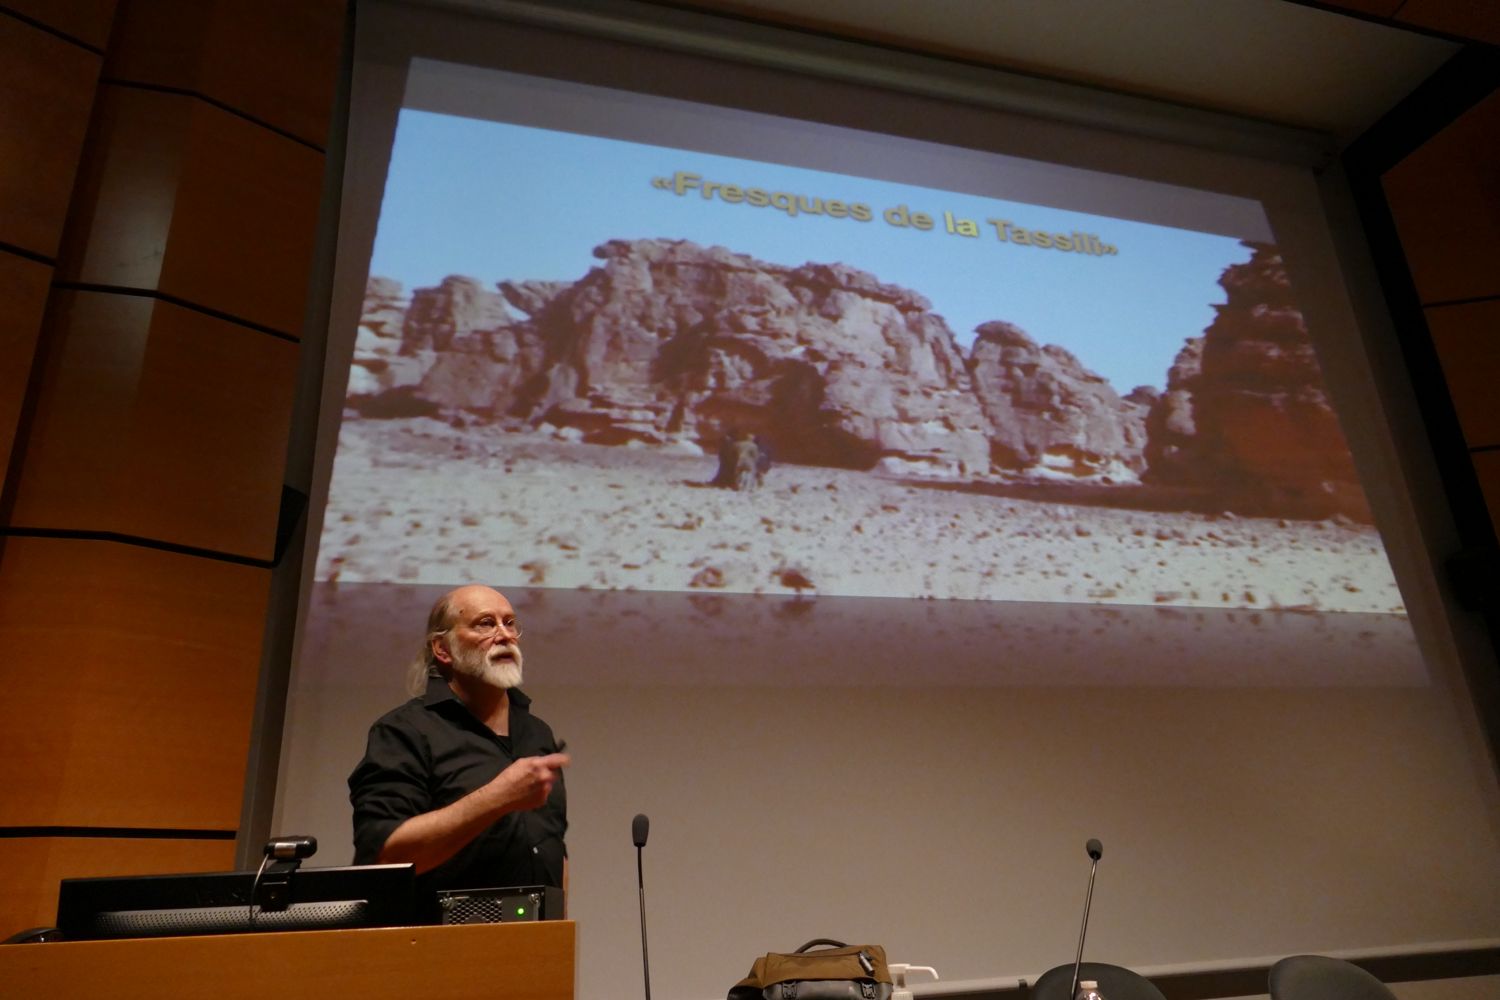 Jean-Loic Le Quellec, president of the Association of the Friends of Saharan Rock Art (AARS), presenting the « érosion pachydermique » (erosion causing a surface reminiscent of a pachyderm’s skin) of the sandstone rocks in the present-day central Sahara.